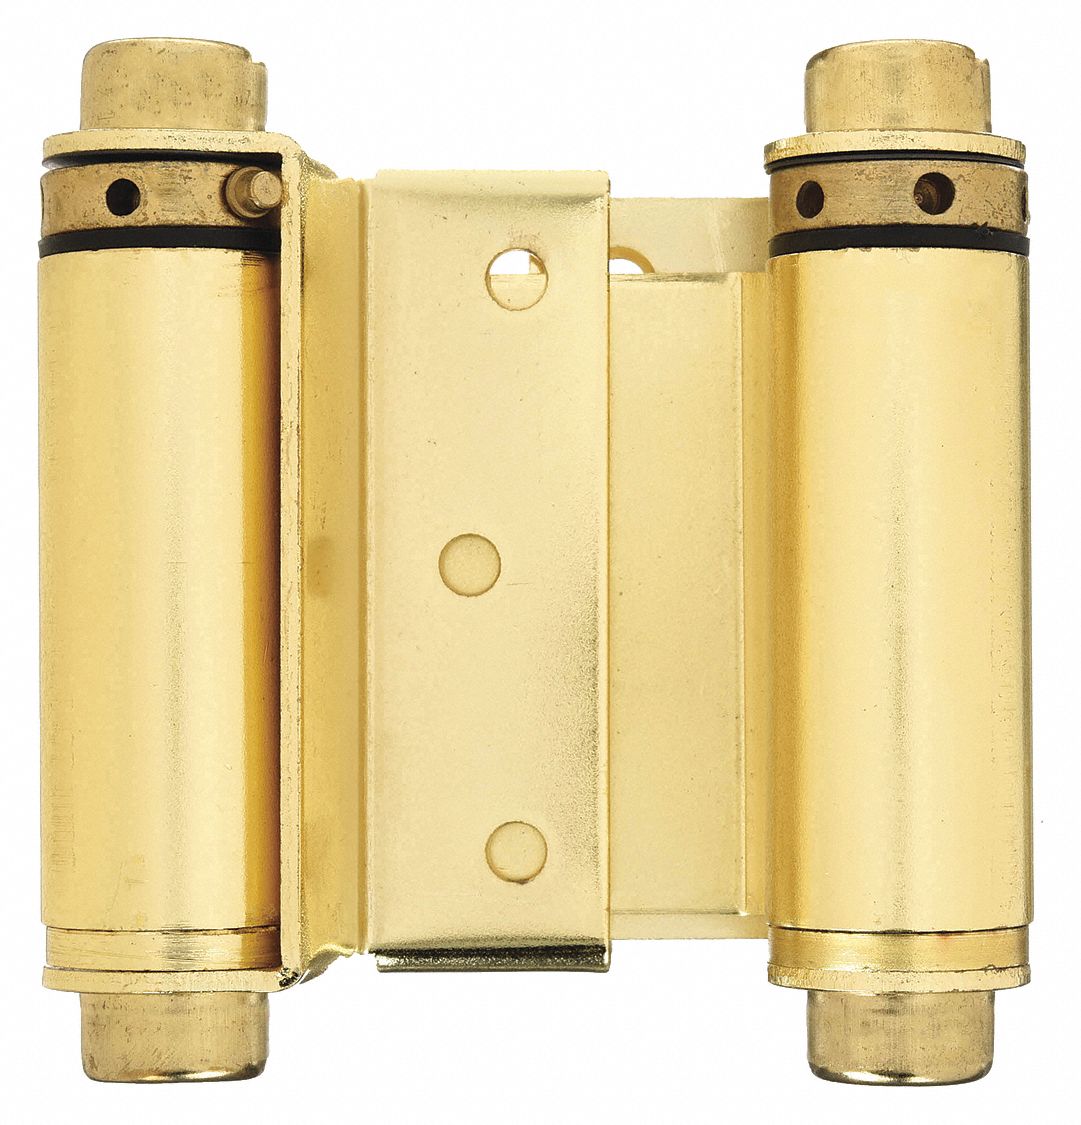 Everbilt 3-inch Brass Double-Acting Spring Hinge (1-pc)